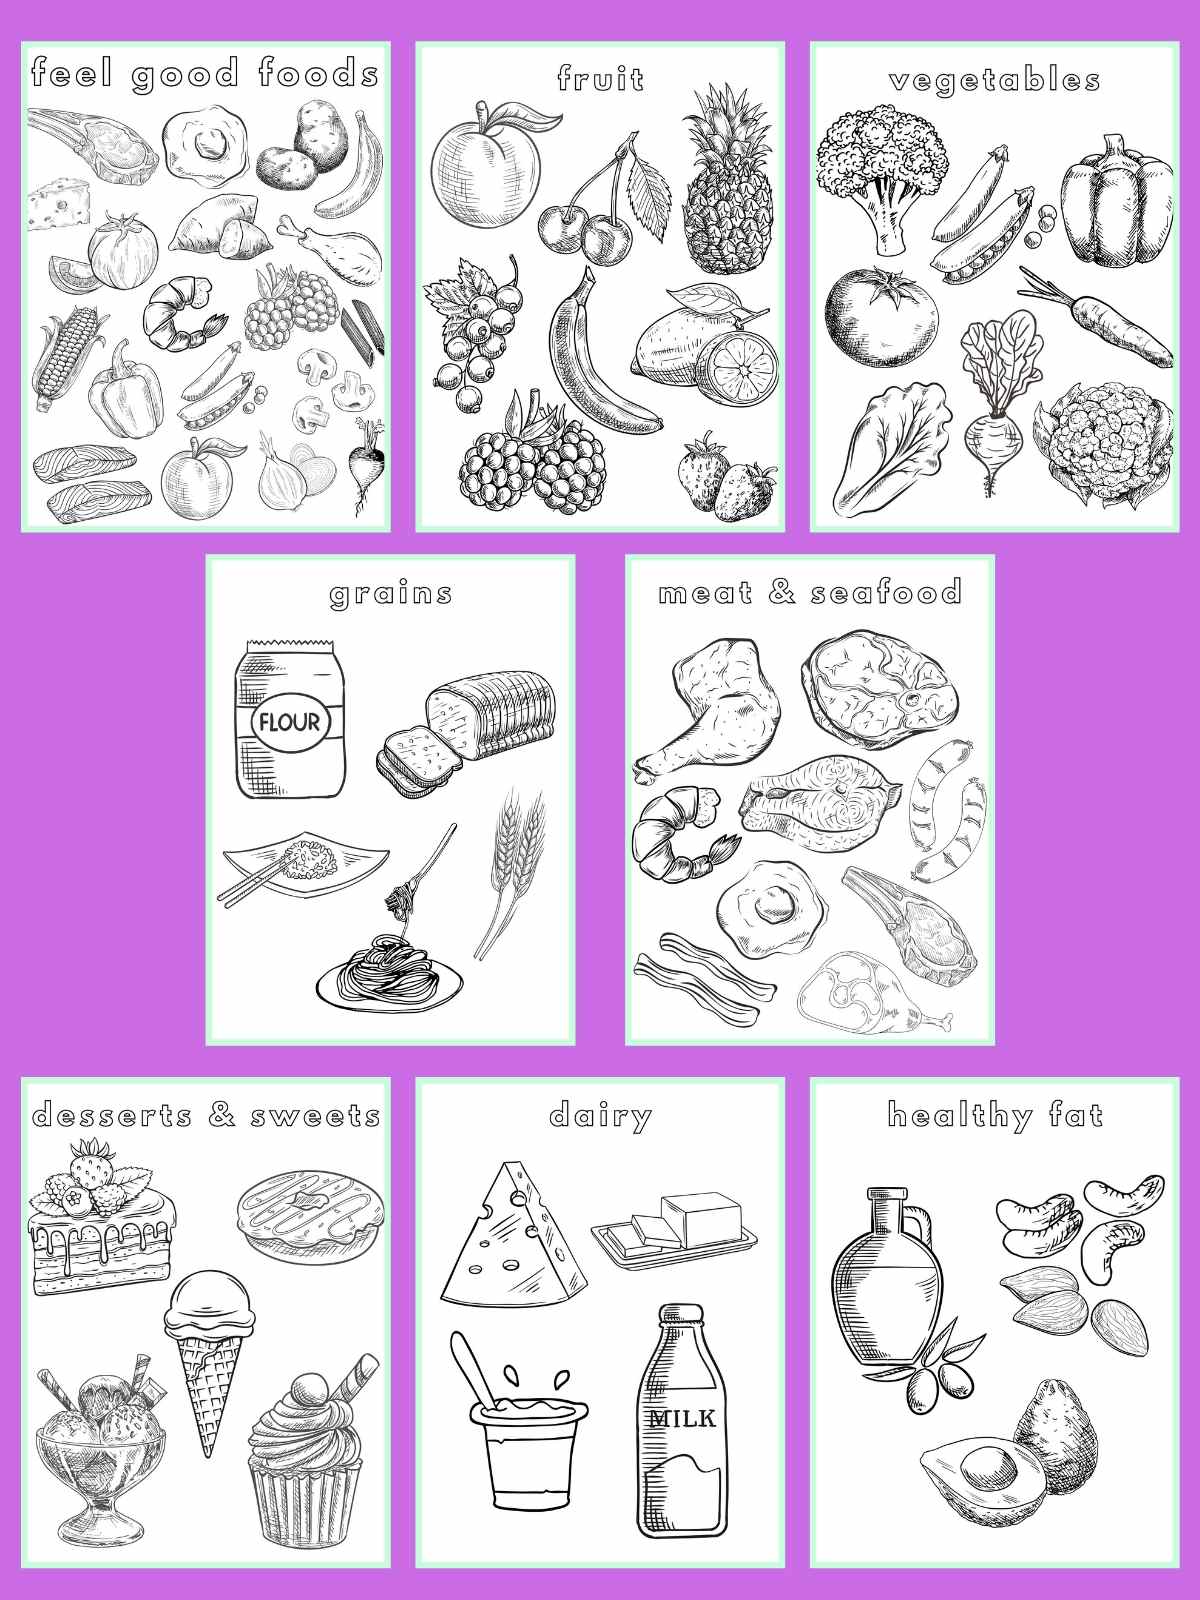 Food coloring pages by category